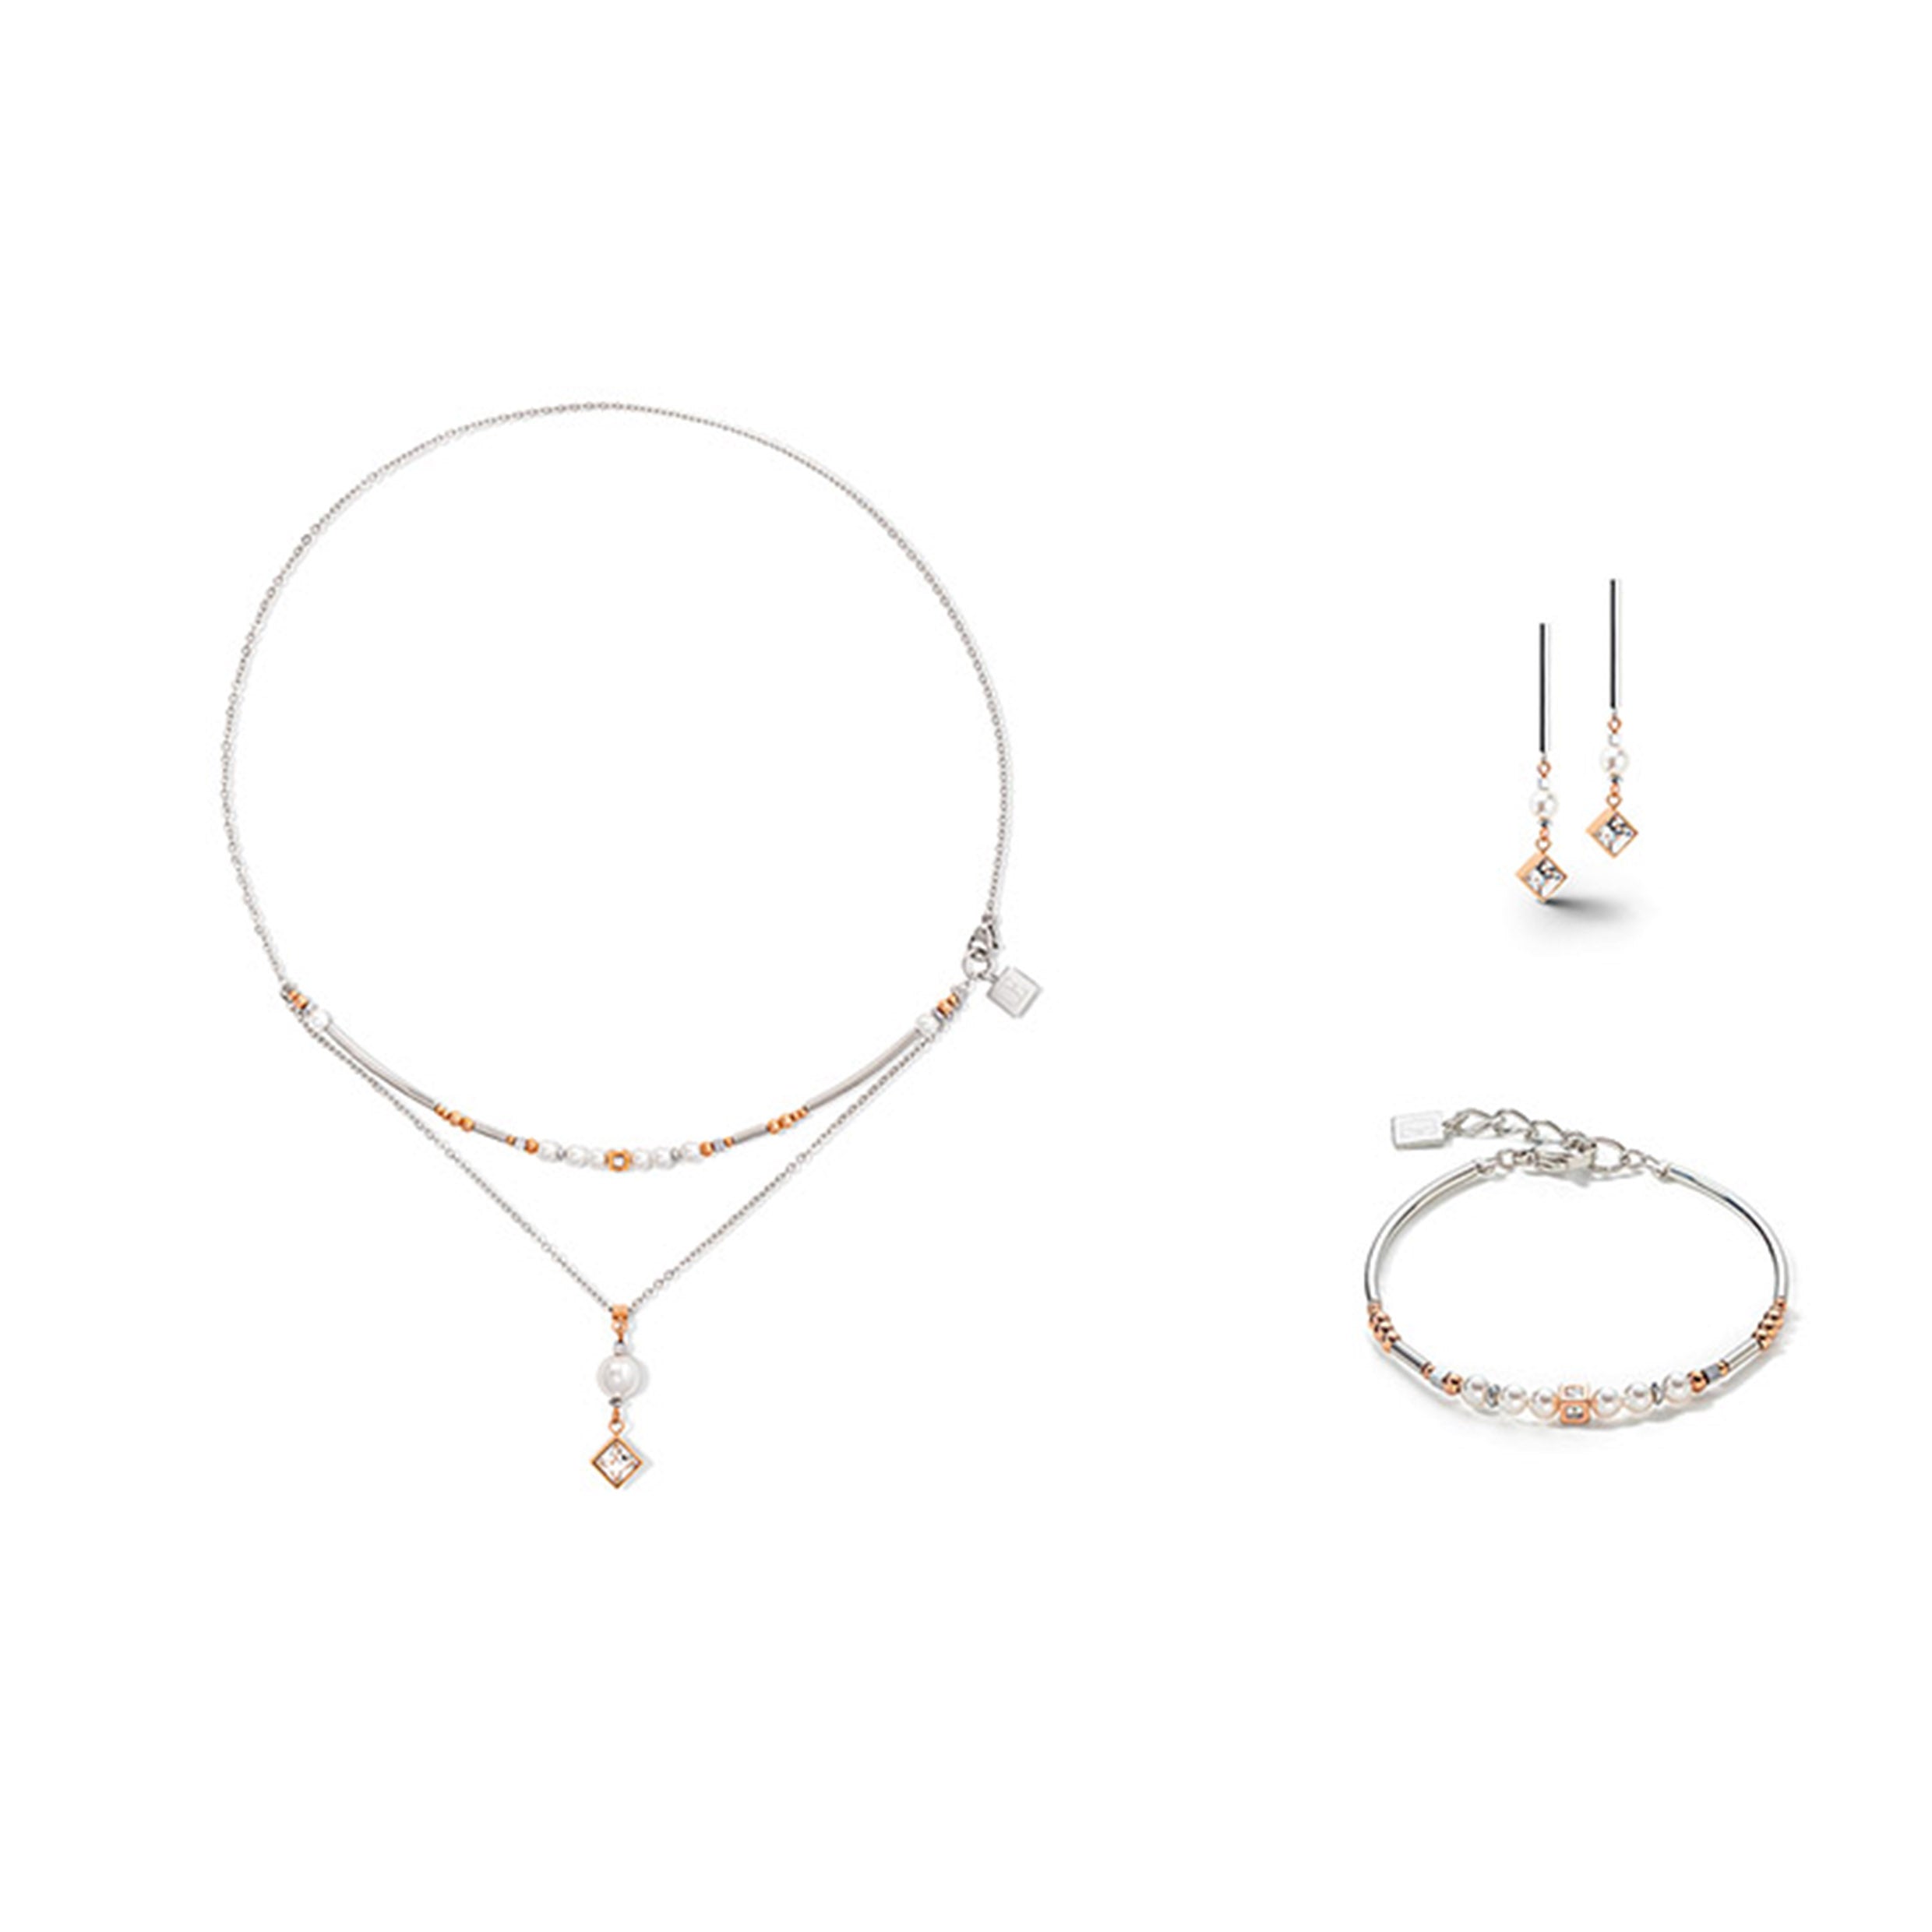 Layered Square Crystal Rose Gold, White & Pearl Necklace 6009/10_1723